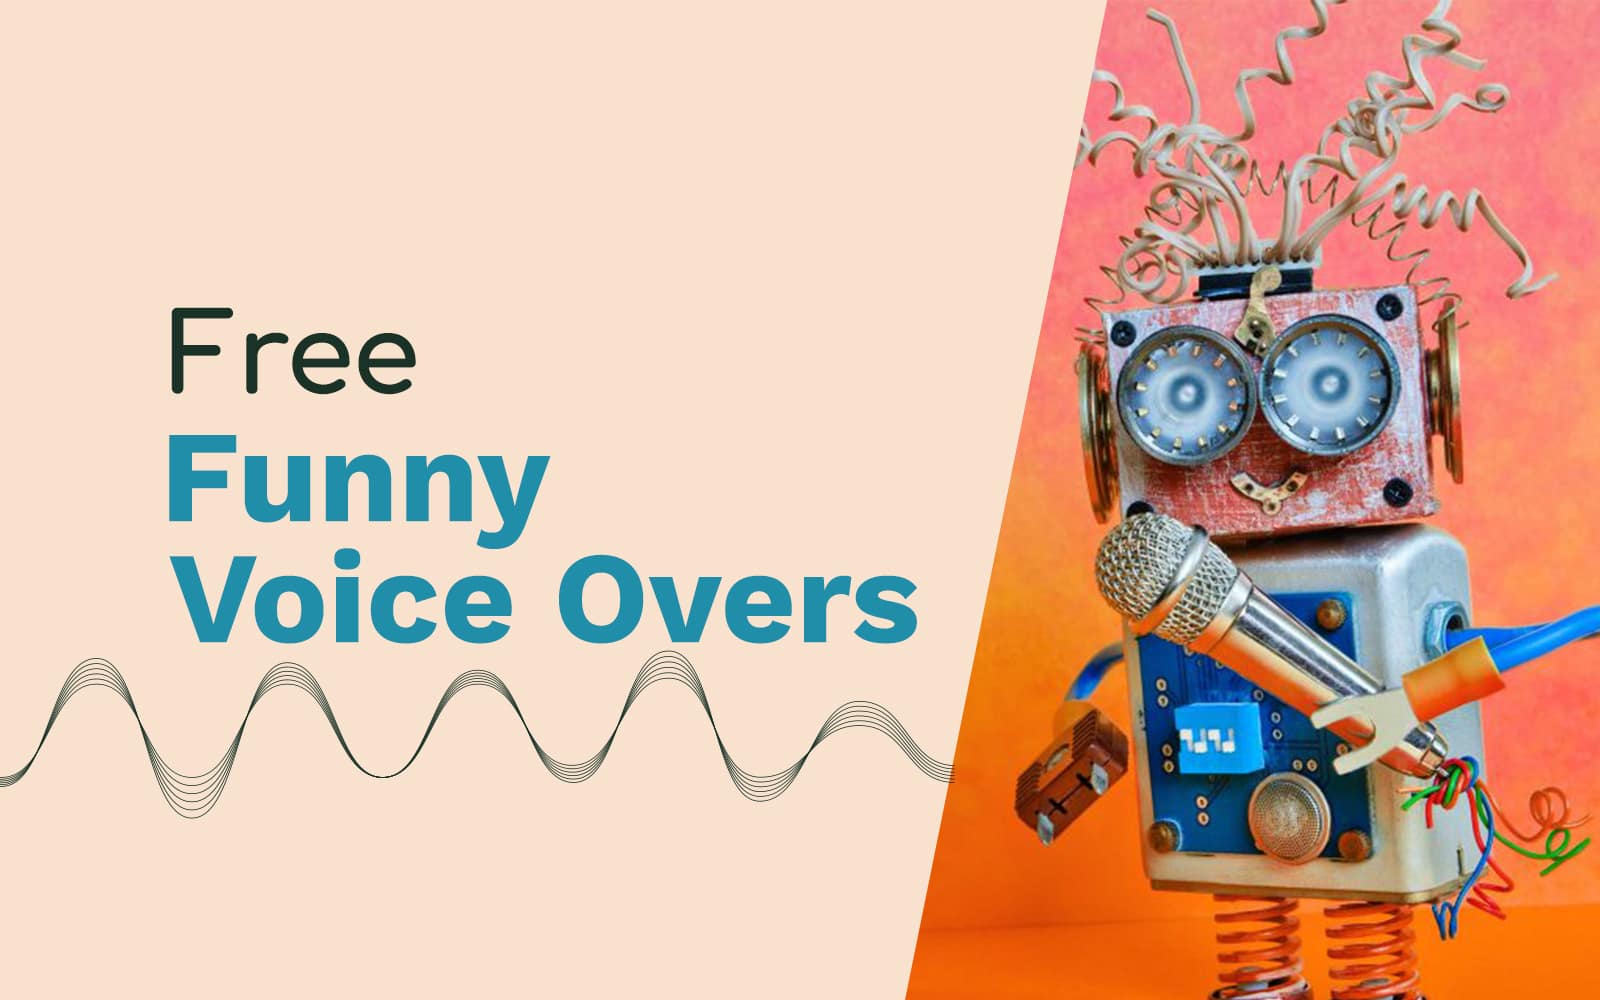 Week 7 summer of sound specials free funny voice overs download 50 off